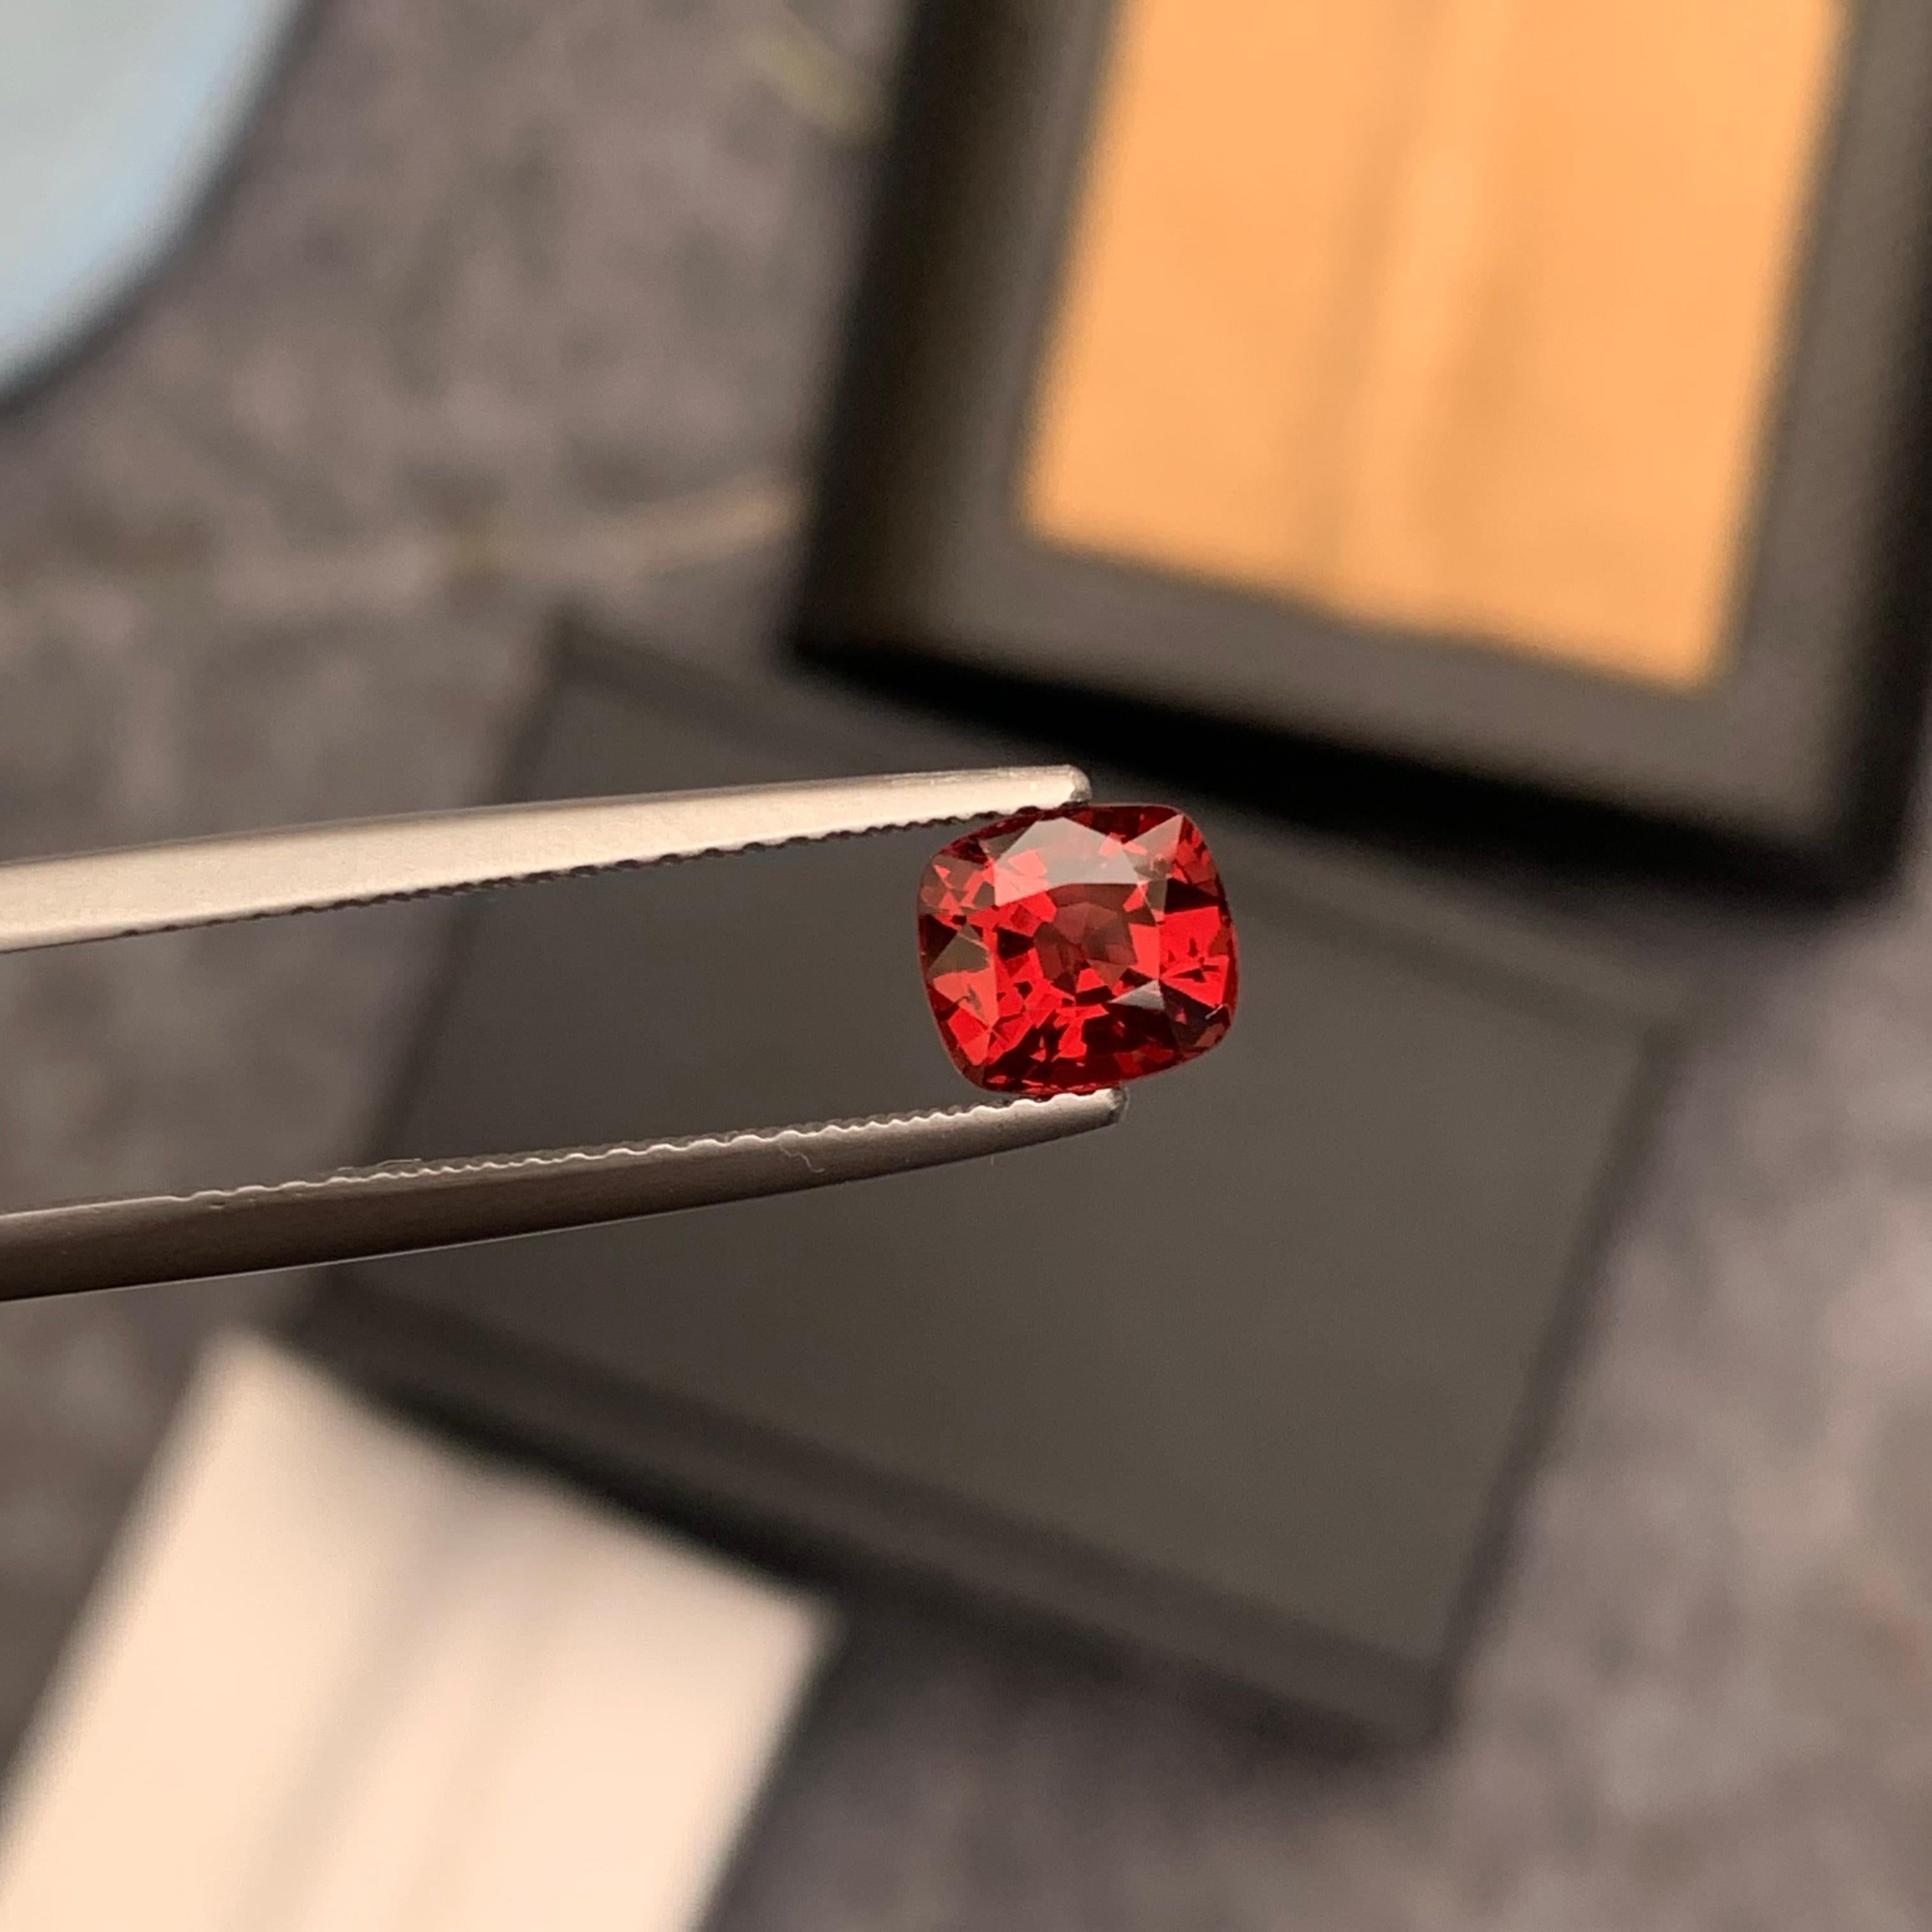 Faceted Red Spinel
Weight: 1.25 Carats
Dimension: 6.4x5.7x4.3 Mm
Origin: Burma Myanmar
Shape: Cushion
Color: Red
Treatment: Non / Natural
Certificate: On Demand
.
The red spinel gemstone is linked to the root chakra and is beneficial in boosting